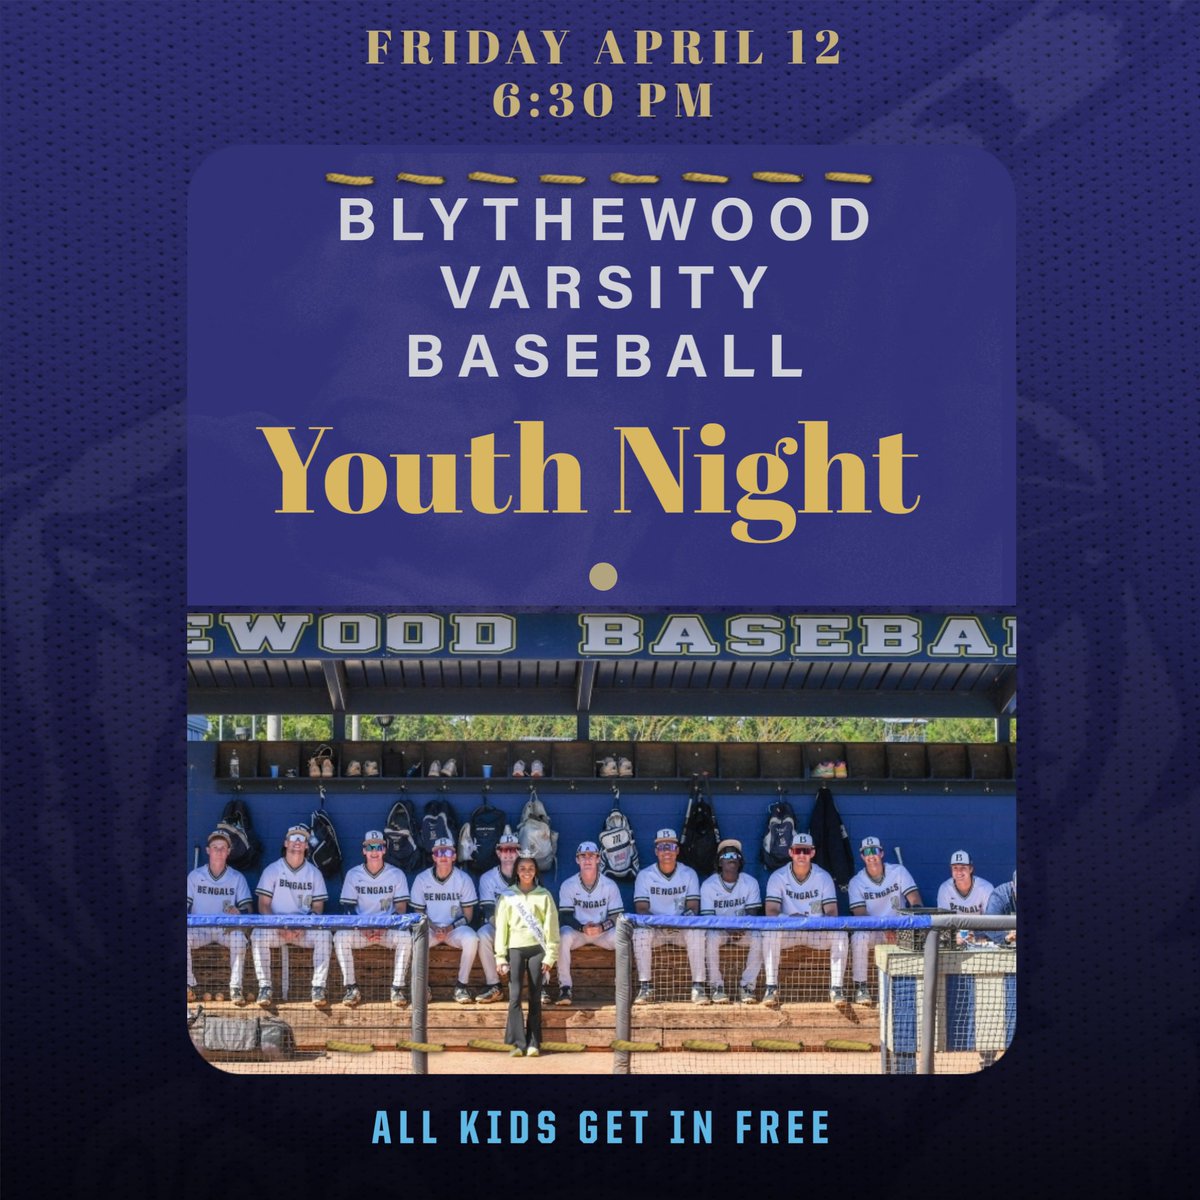 Join us for Youth Night at Bengal Park this Friday April 12. All kids are FREE. First PItch at 6:30 pm . See you at the Park!